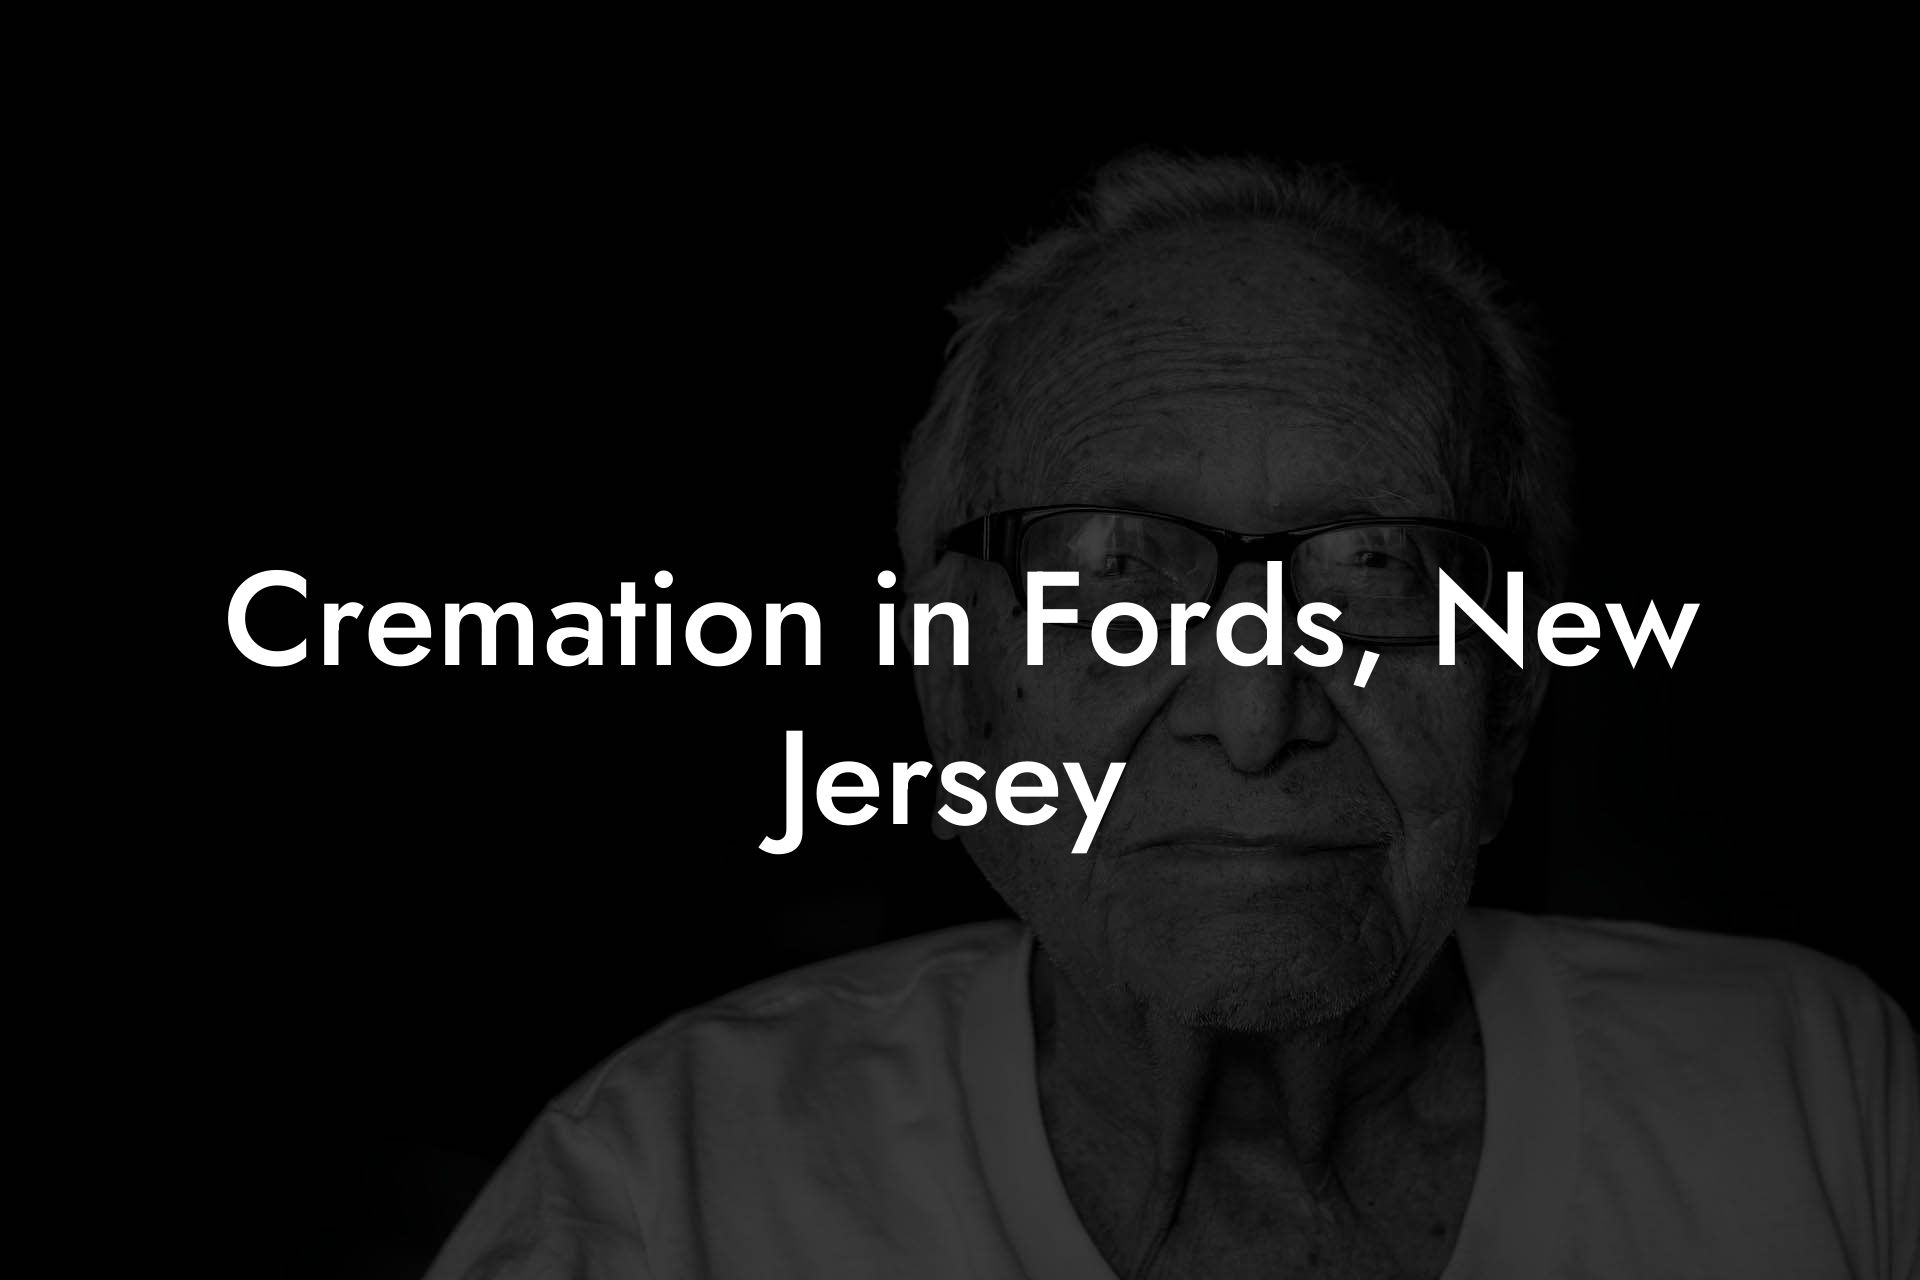 Cremation in Fords, New Jersey